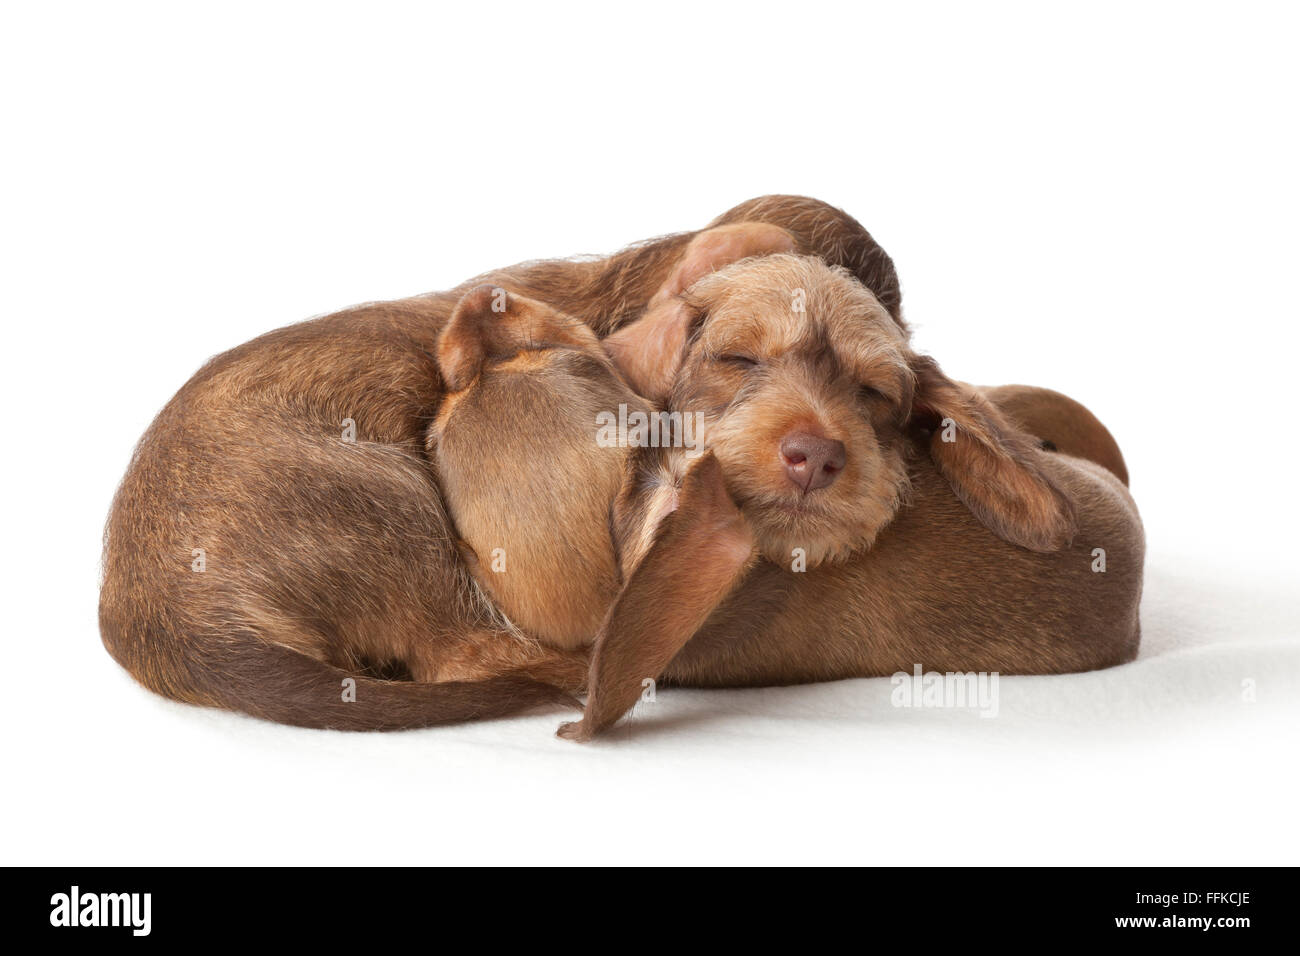 Wire-haired dachshund puppies sleeping together  on white background Stock Photo